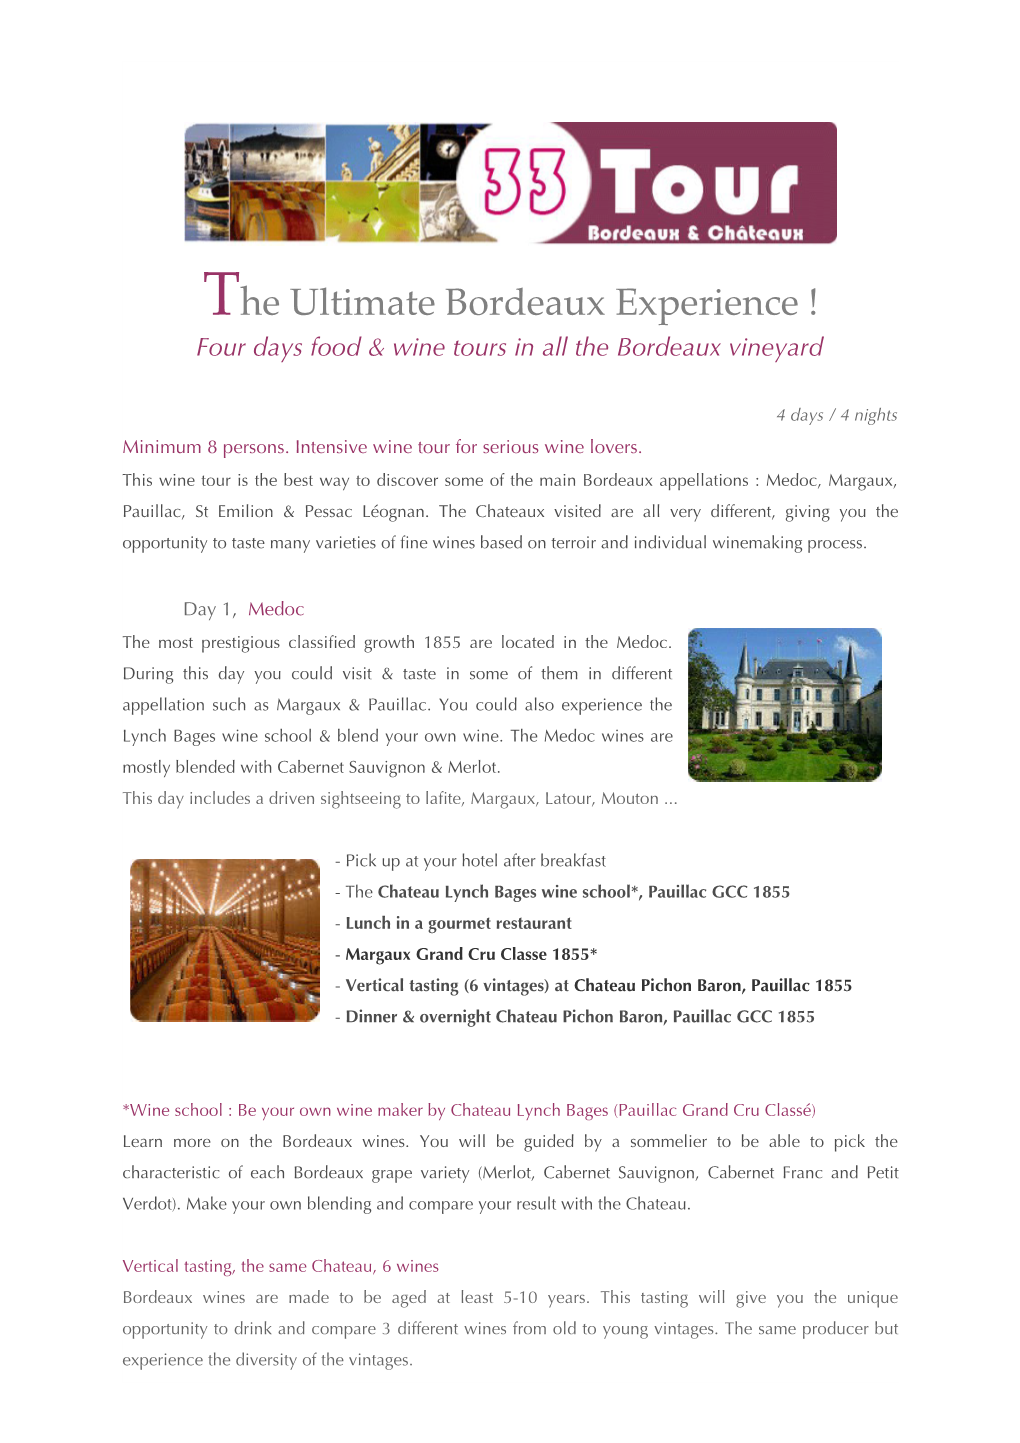 The Ultimate Bordeaux Experience ! Four Days Food & Wine Tours in All the Bordeaux Vineyard